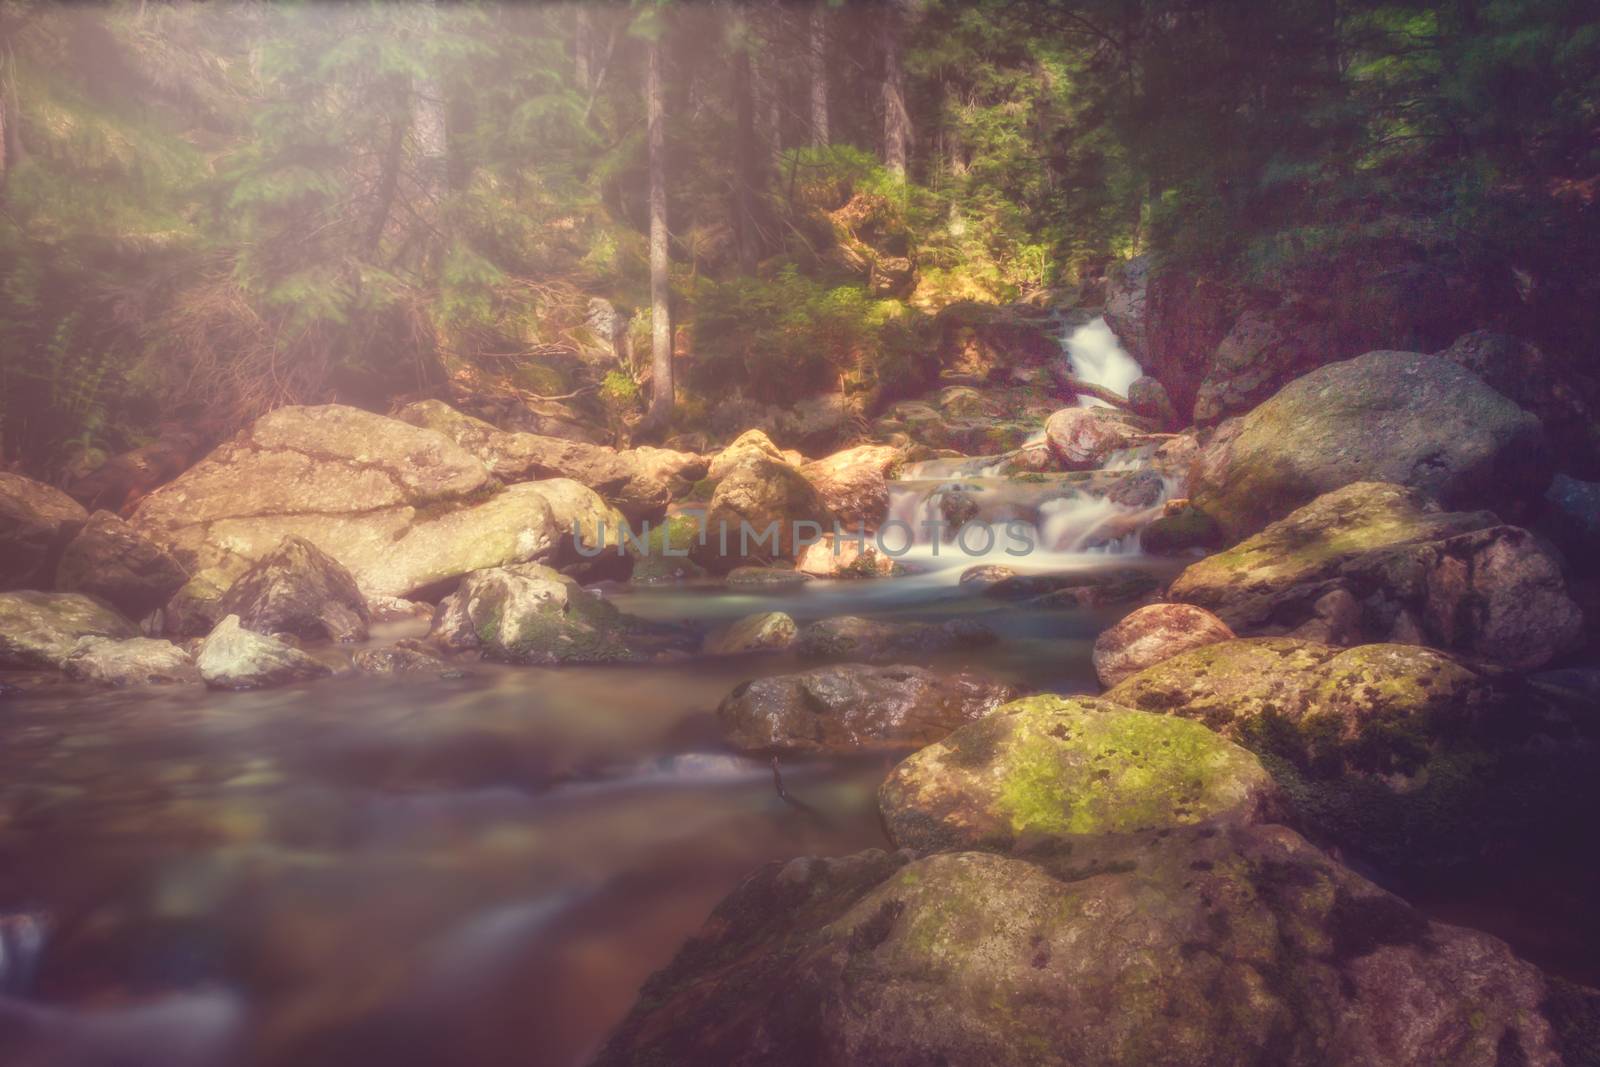 Long exposure from a little river with rocks